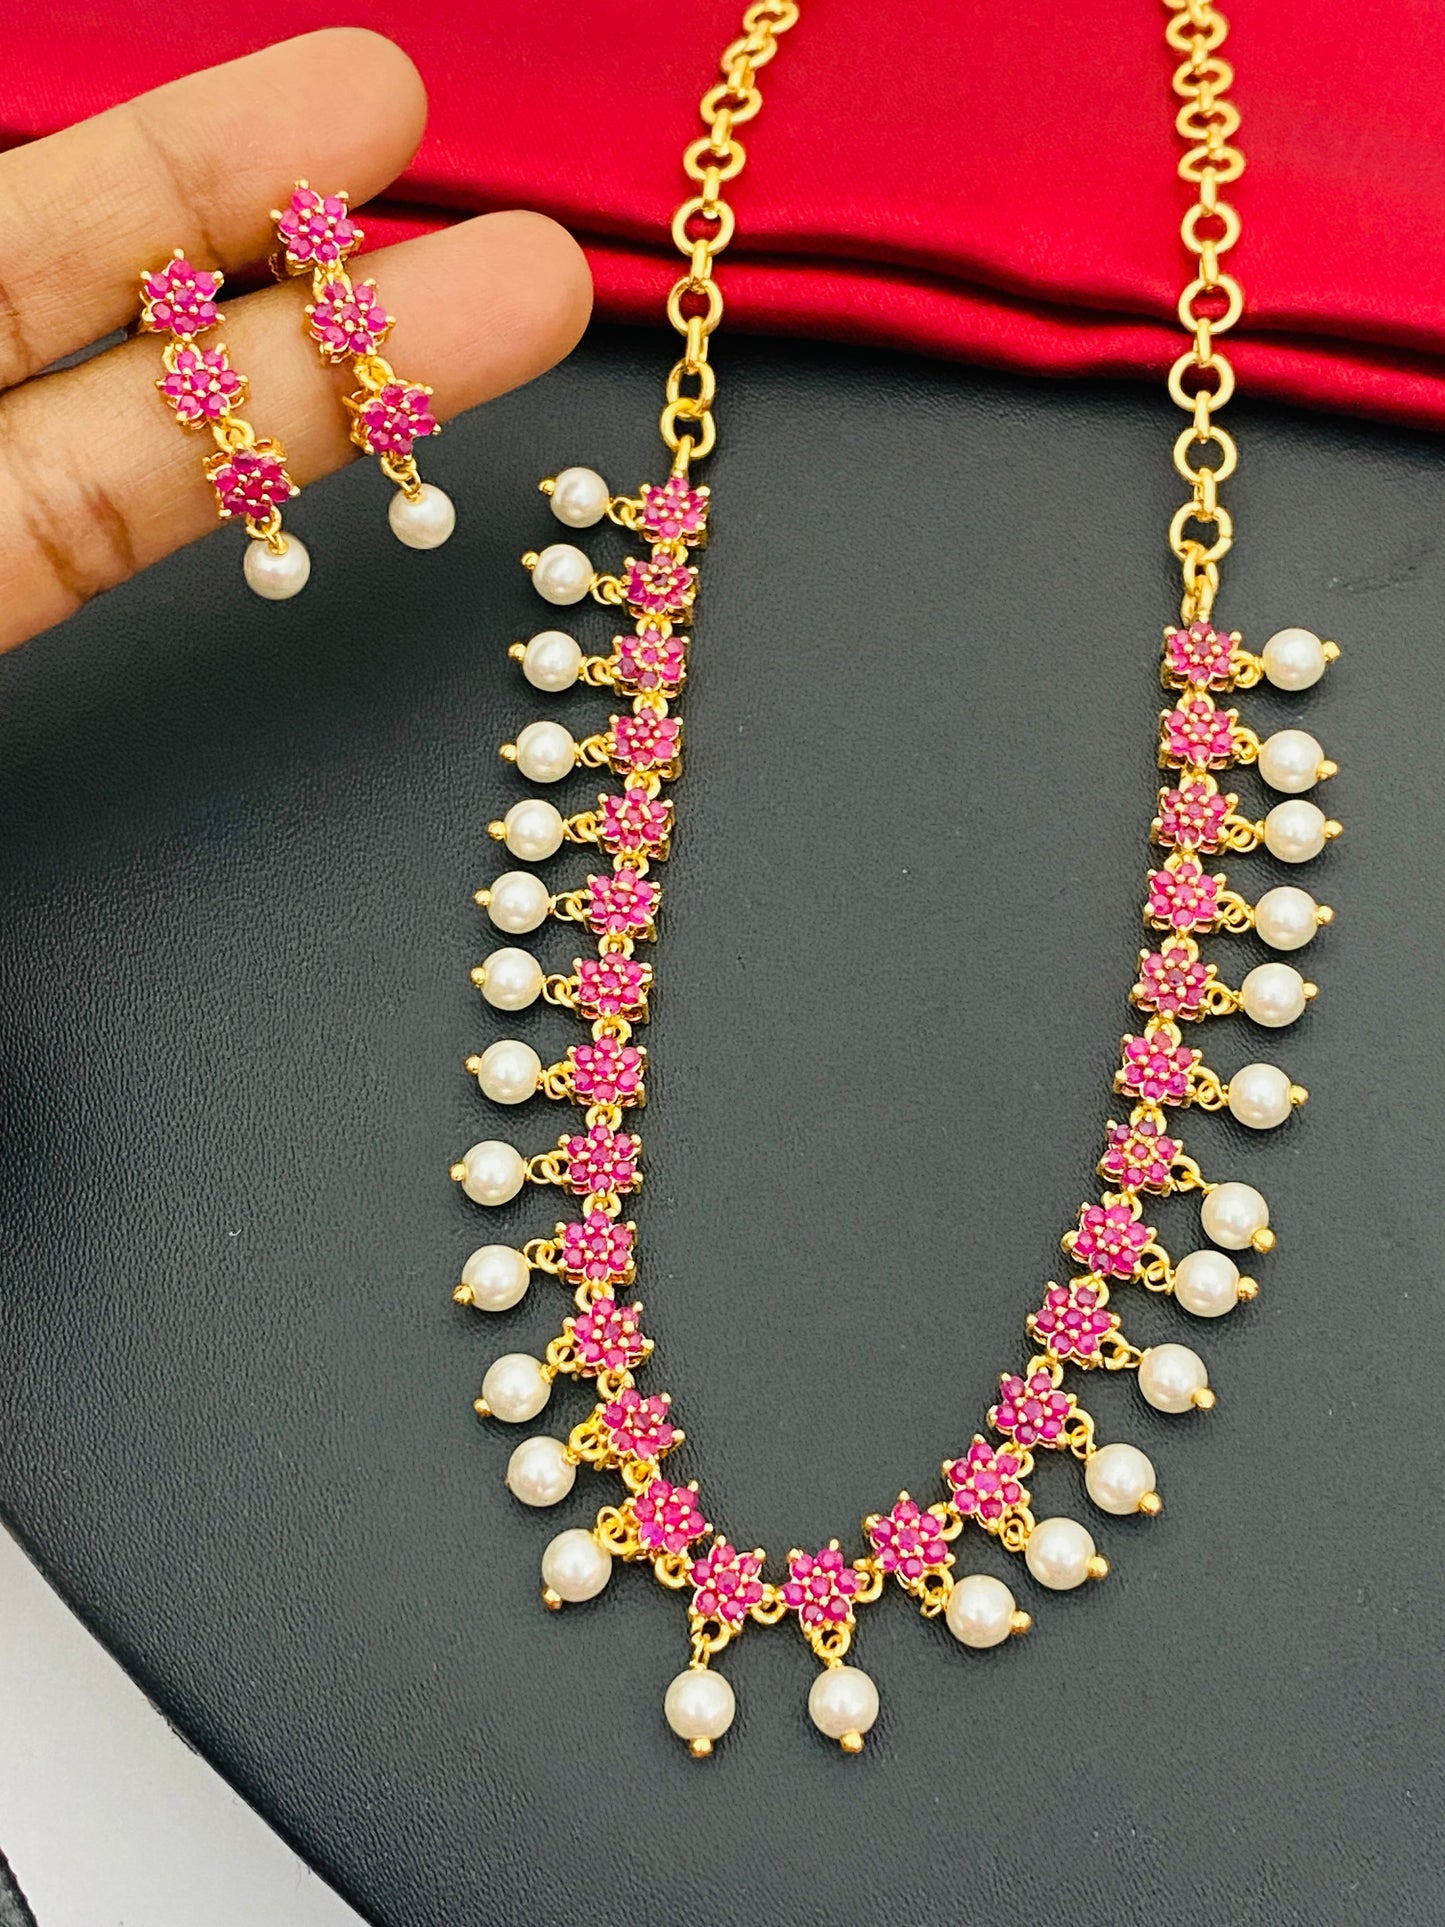 Shinning Necklace And Earrings for Women In USA